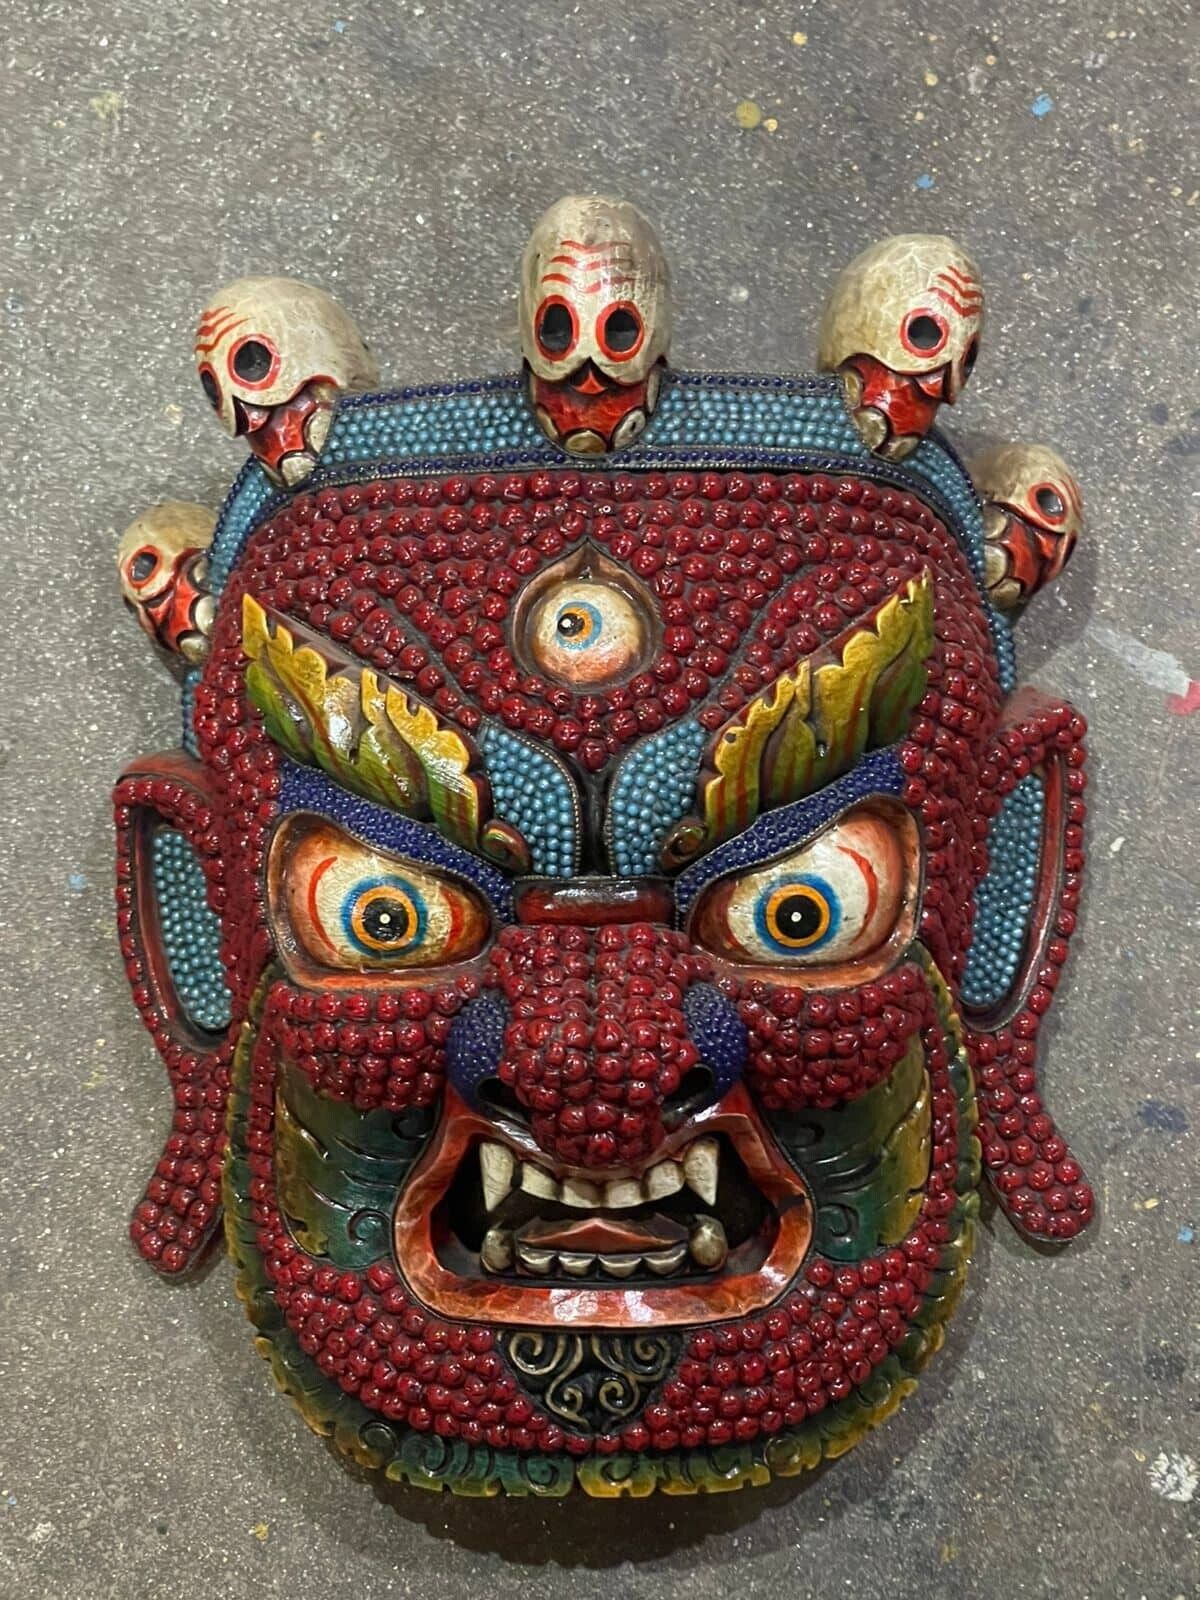 Magnificent Nepal Turquoise & Coral Bhairab Mask – the “Mask of Annihilation\